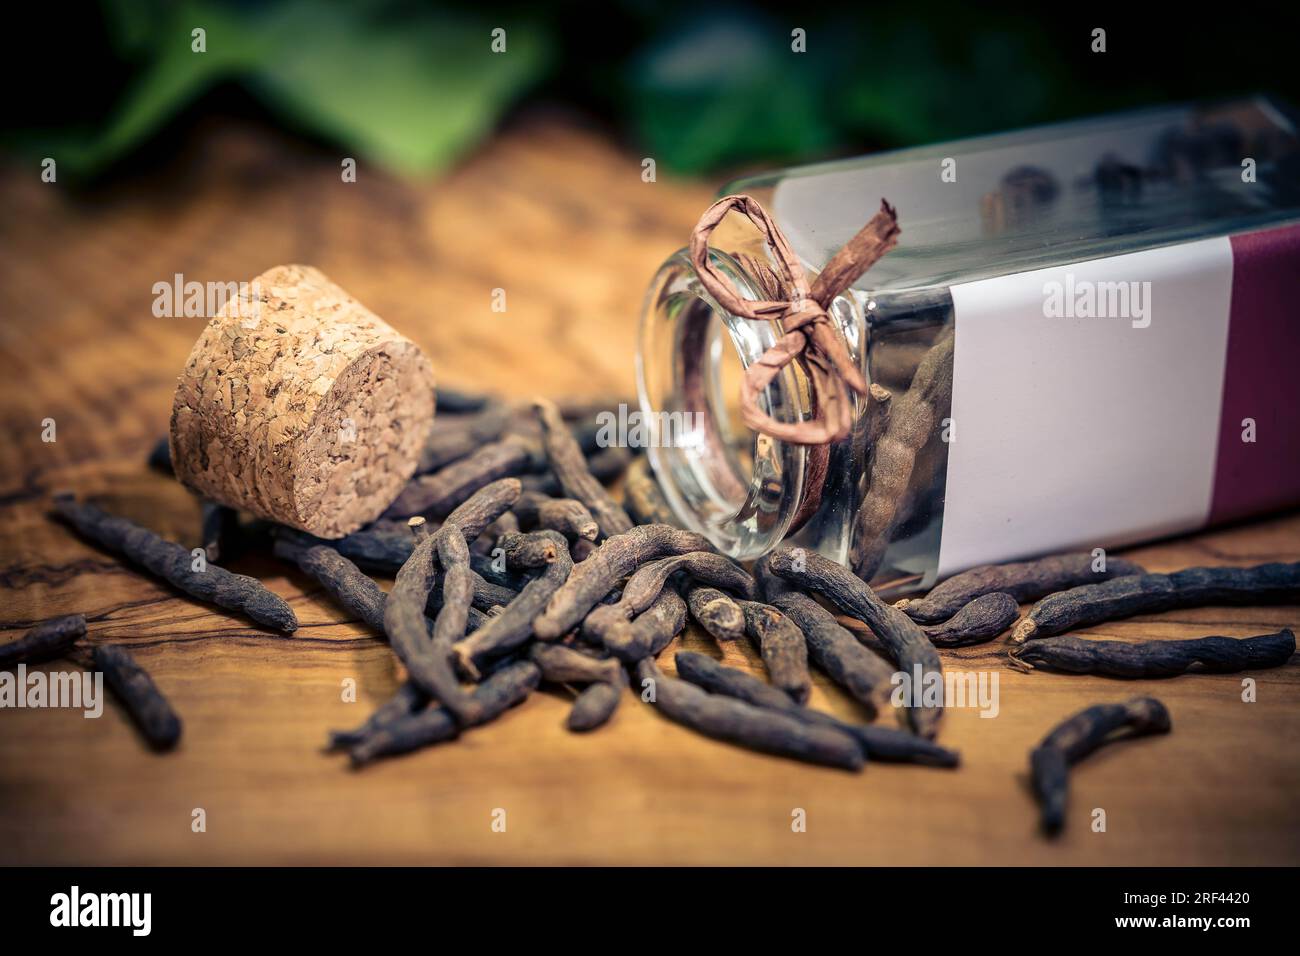 Black long pepper xylopia aethiopica on olive wood Stock Photo